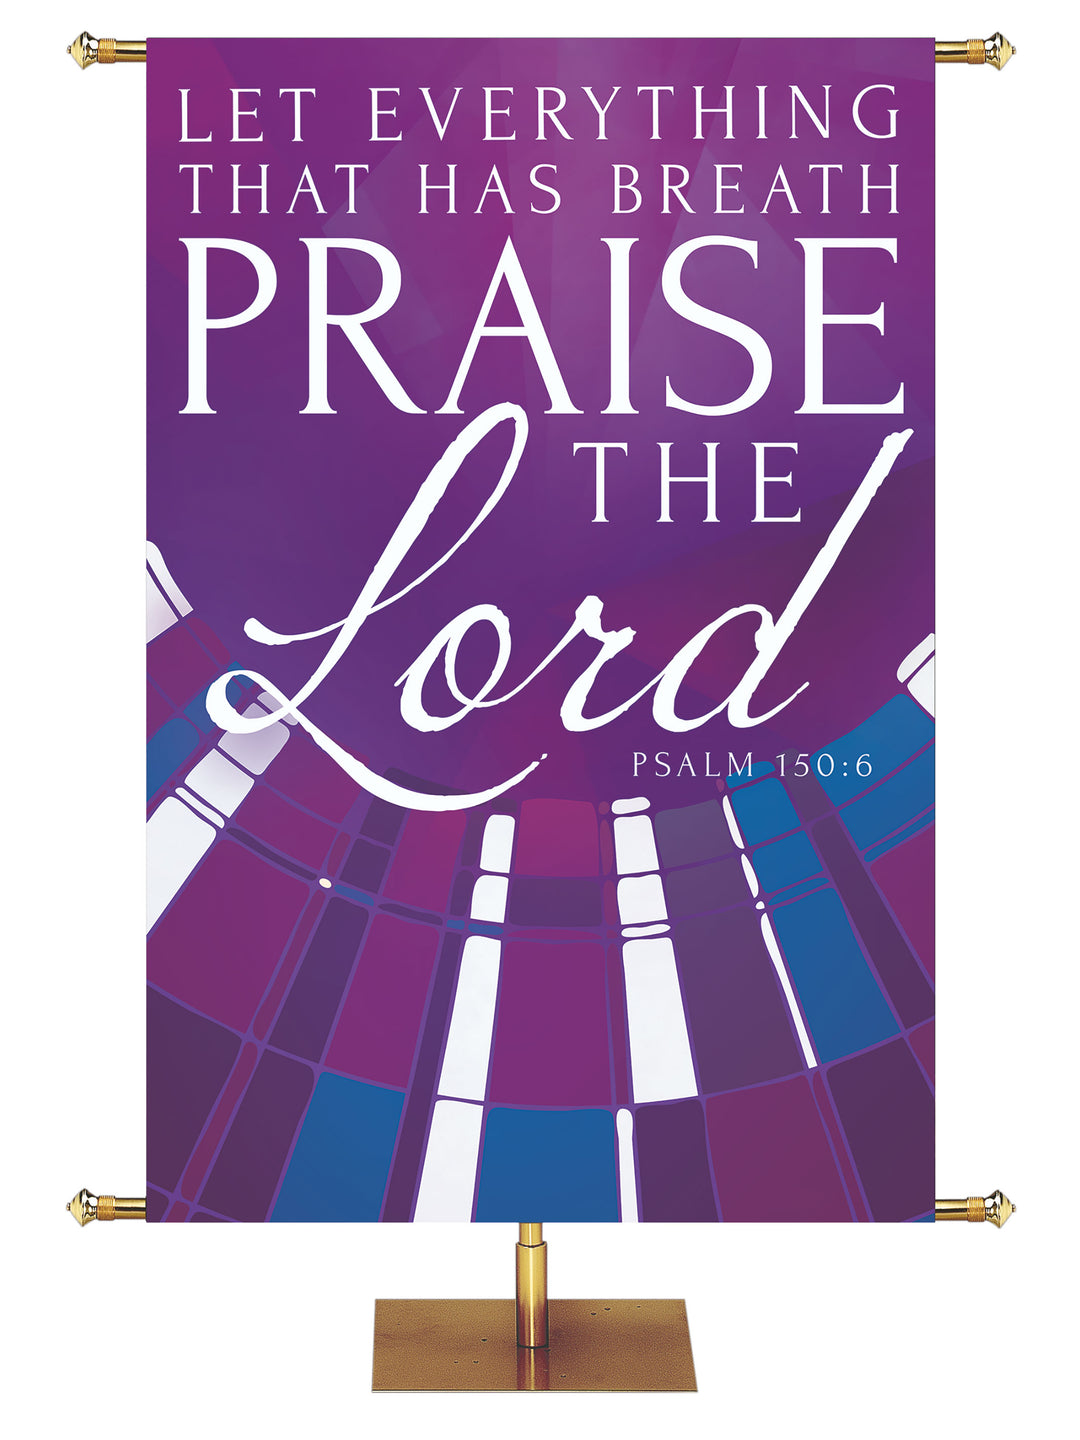 Church Banner Streaming Light Let Everything That Has Breath Praise The Lord. Psalm 50:6. In Blue, Green, Purple and Red.